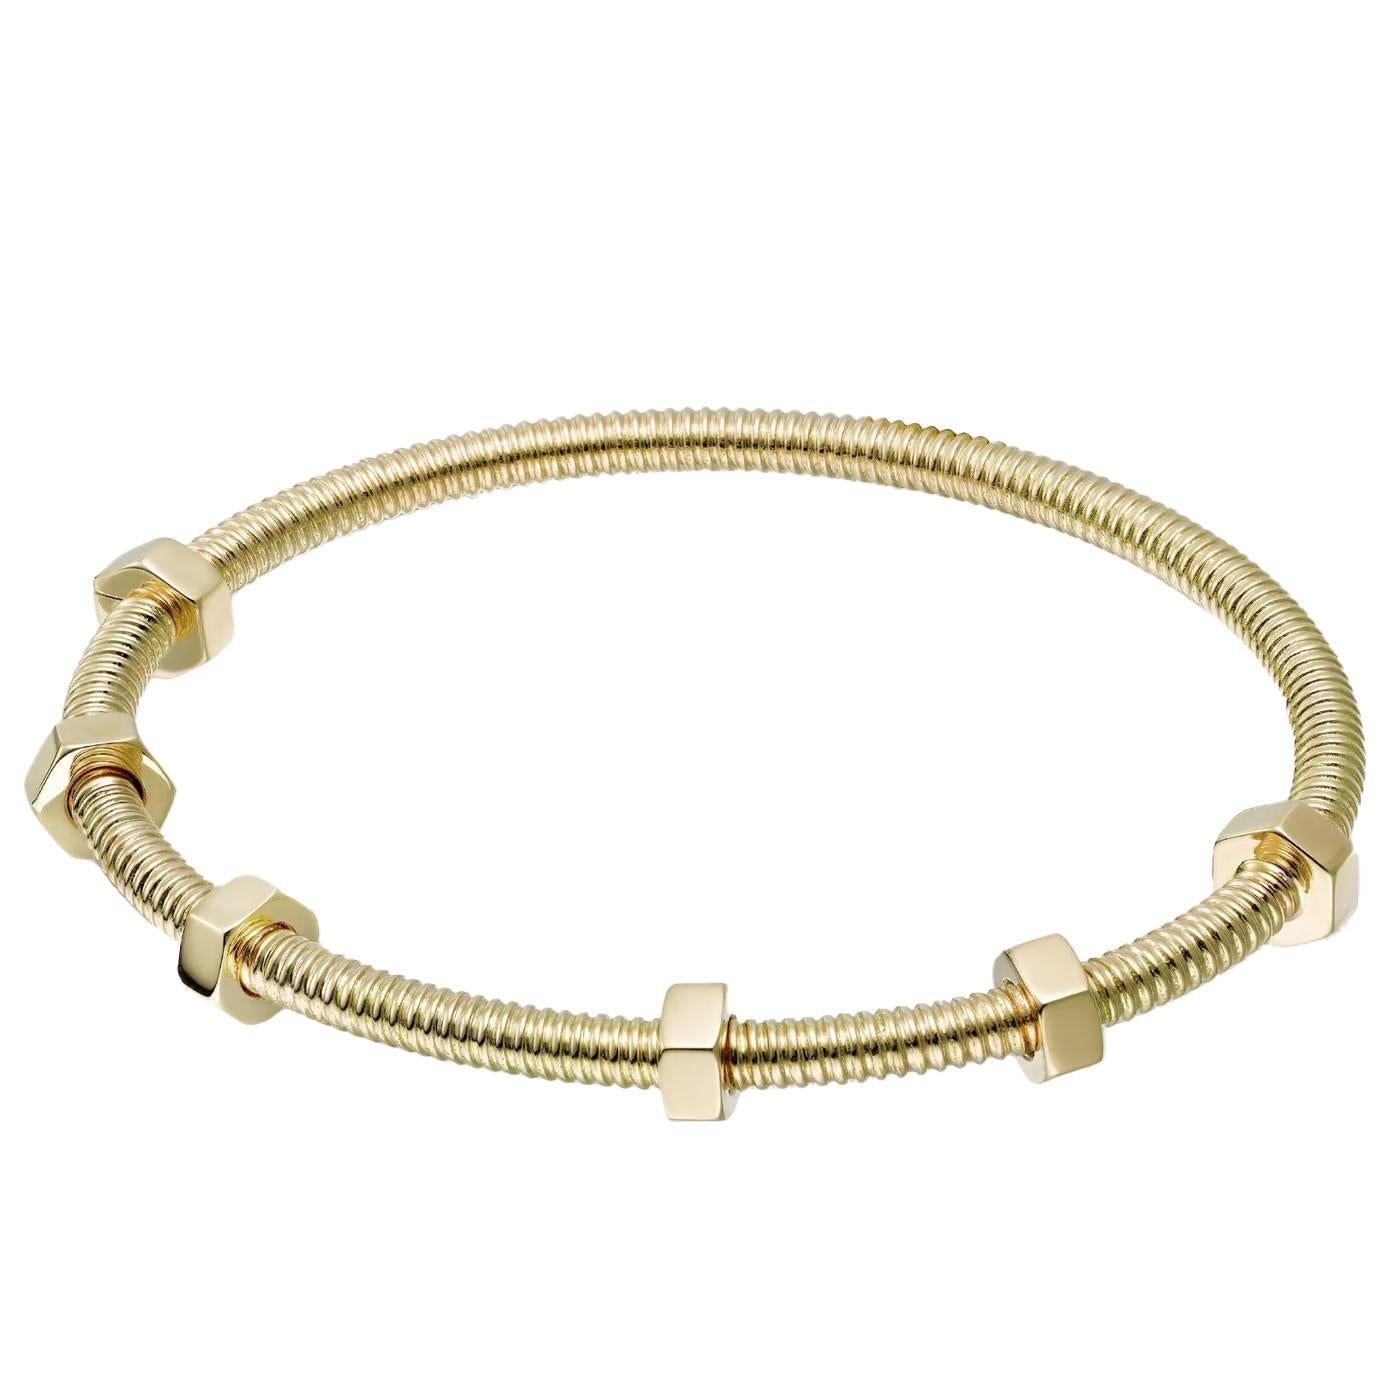 Écrou de Cartier bracelet, 18K yellow gold (750/1000). Width: 3.5 mm (for size 20).

Details:
Brand: Cartier
Type: Bracelet
Material: 18K Yellow Gold
Size: 20
Theme: Romantic, Love
Scope of Delivery: Box and Papers
Condition: New
Purchased: